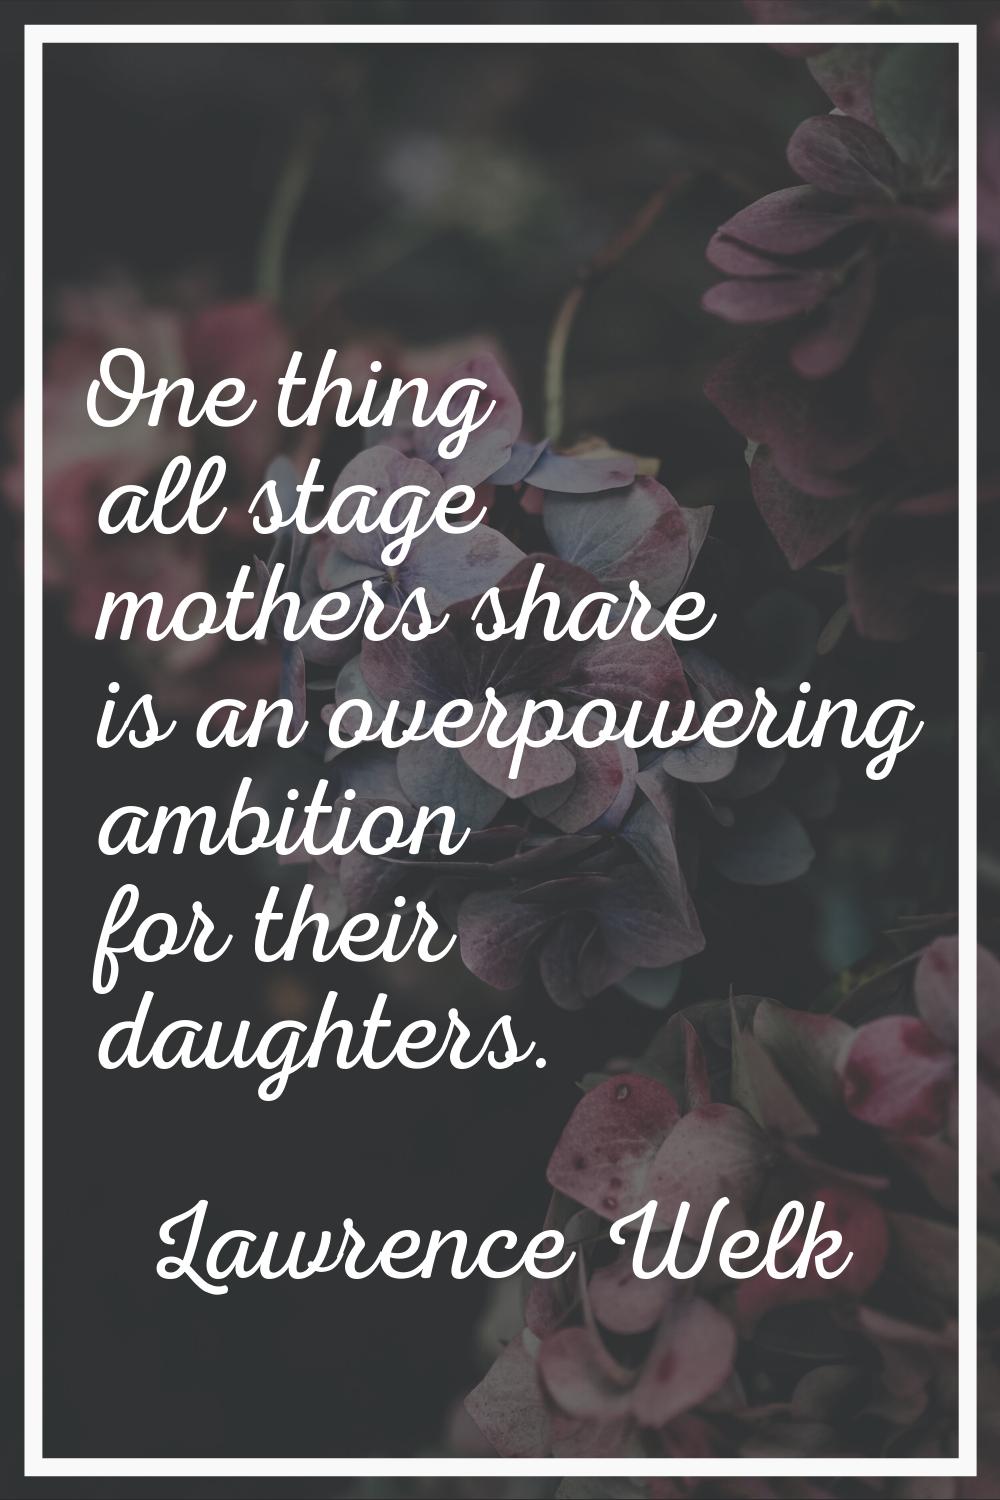 One thing all stage mothers share is an overpowering ambition for their daughters.